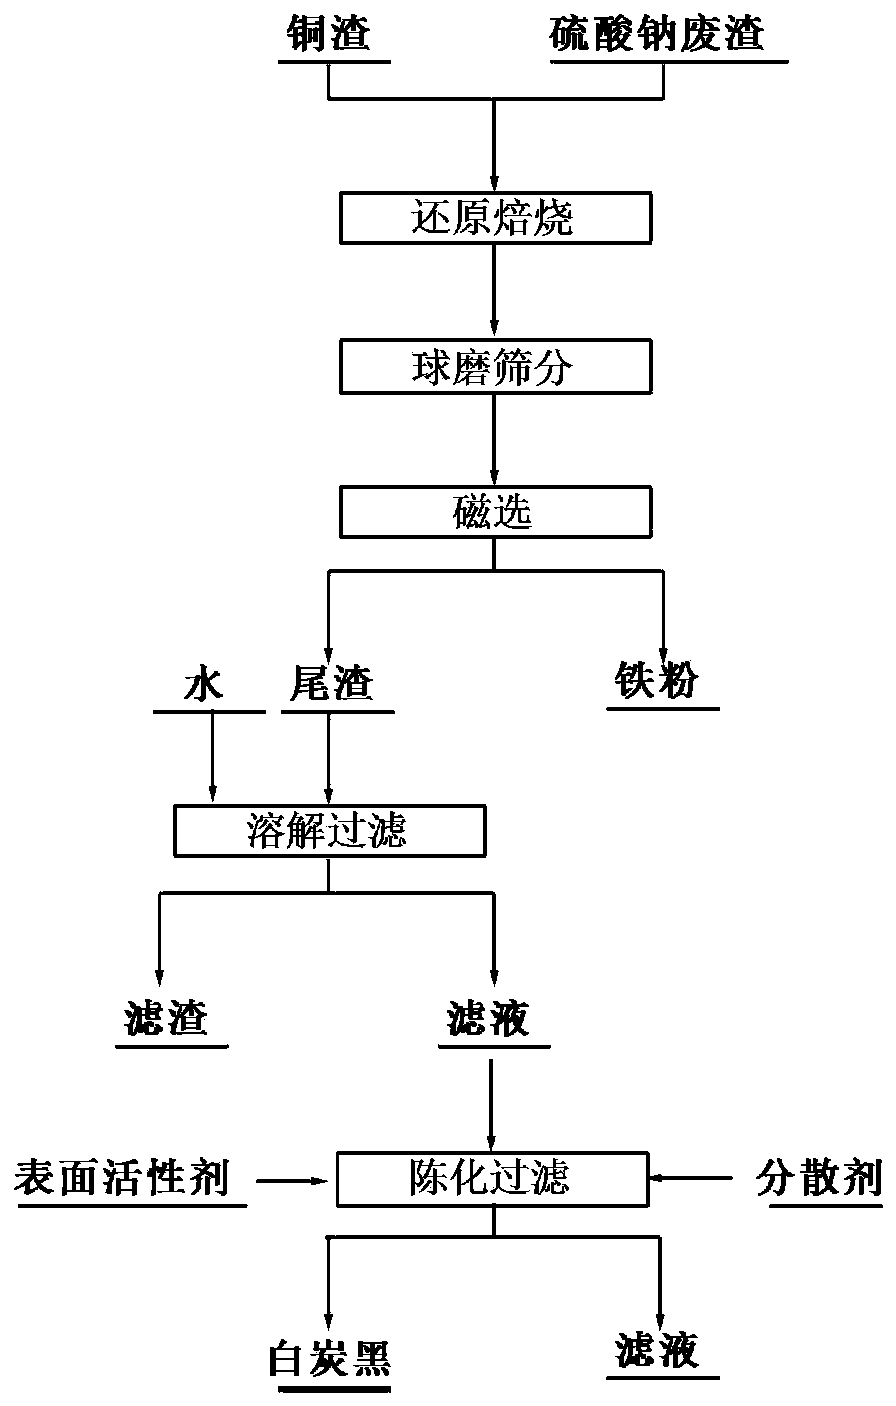 Method for cooperatively recycling copper slag and sodium sulfate waste residues